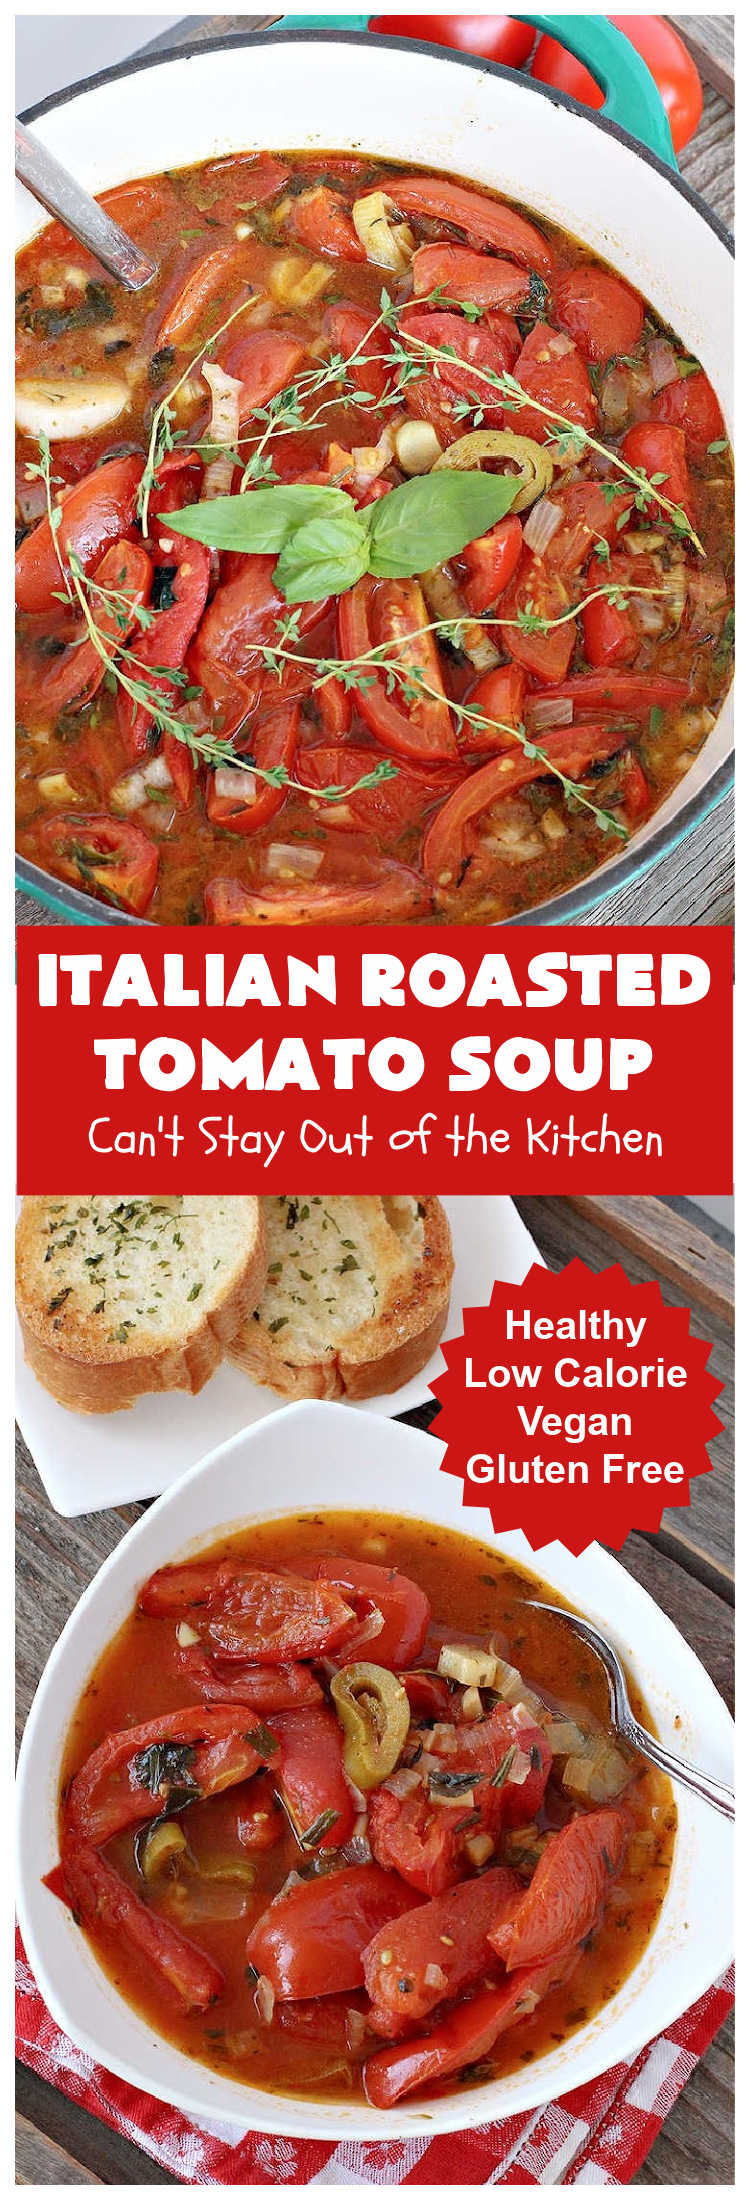 Italian Roasted Tomato Soup | Can't Stay Out of the Kitchen